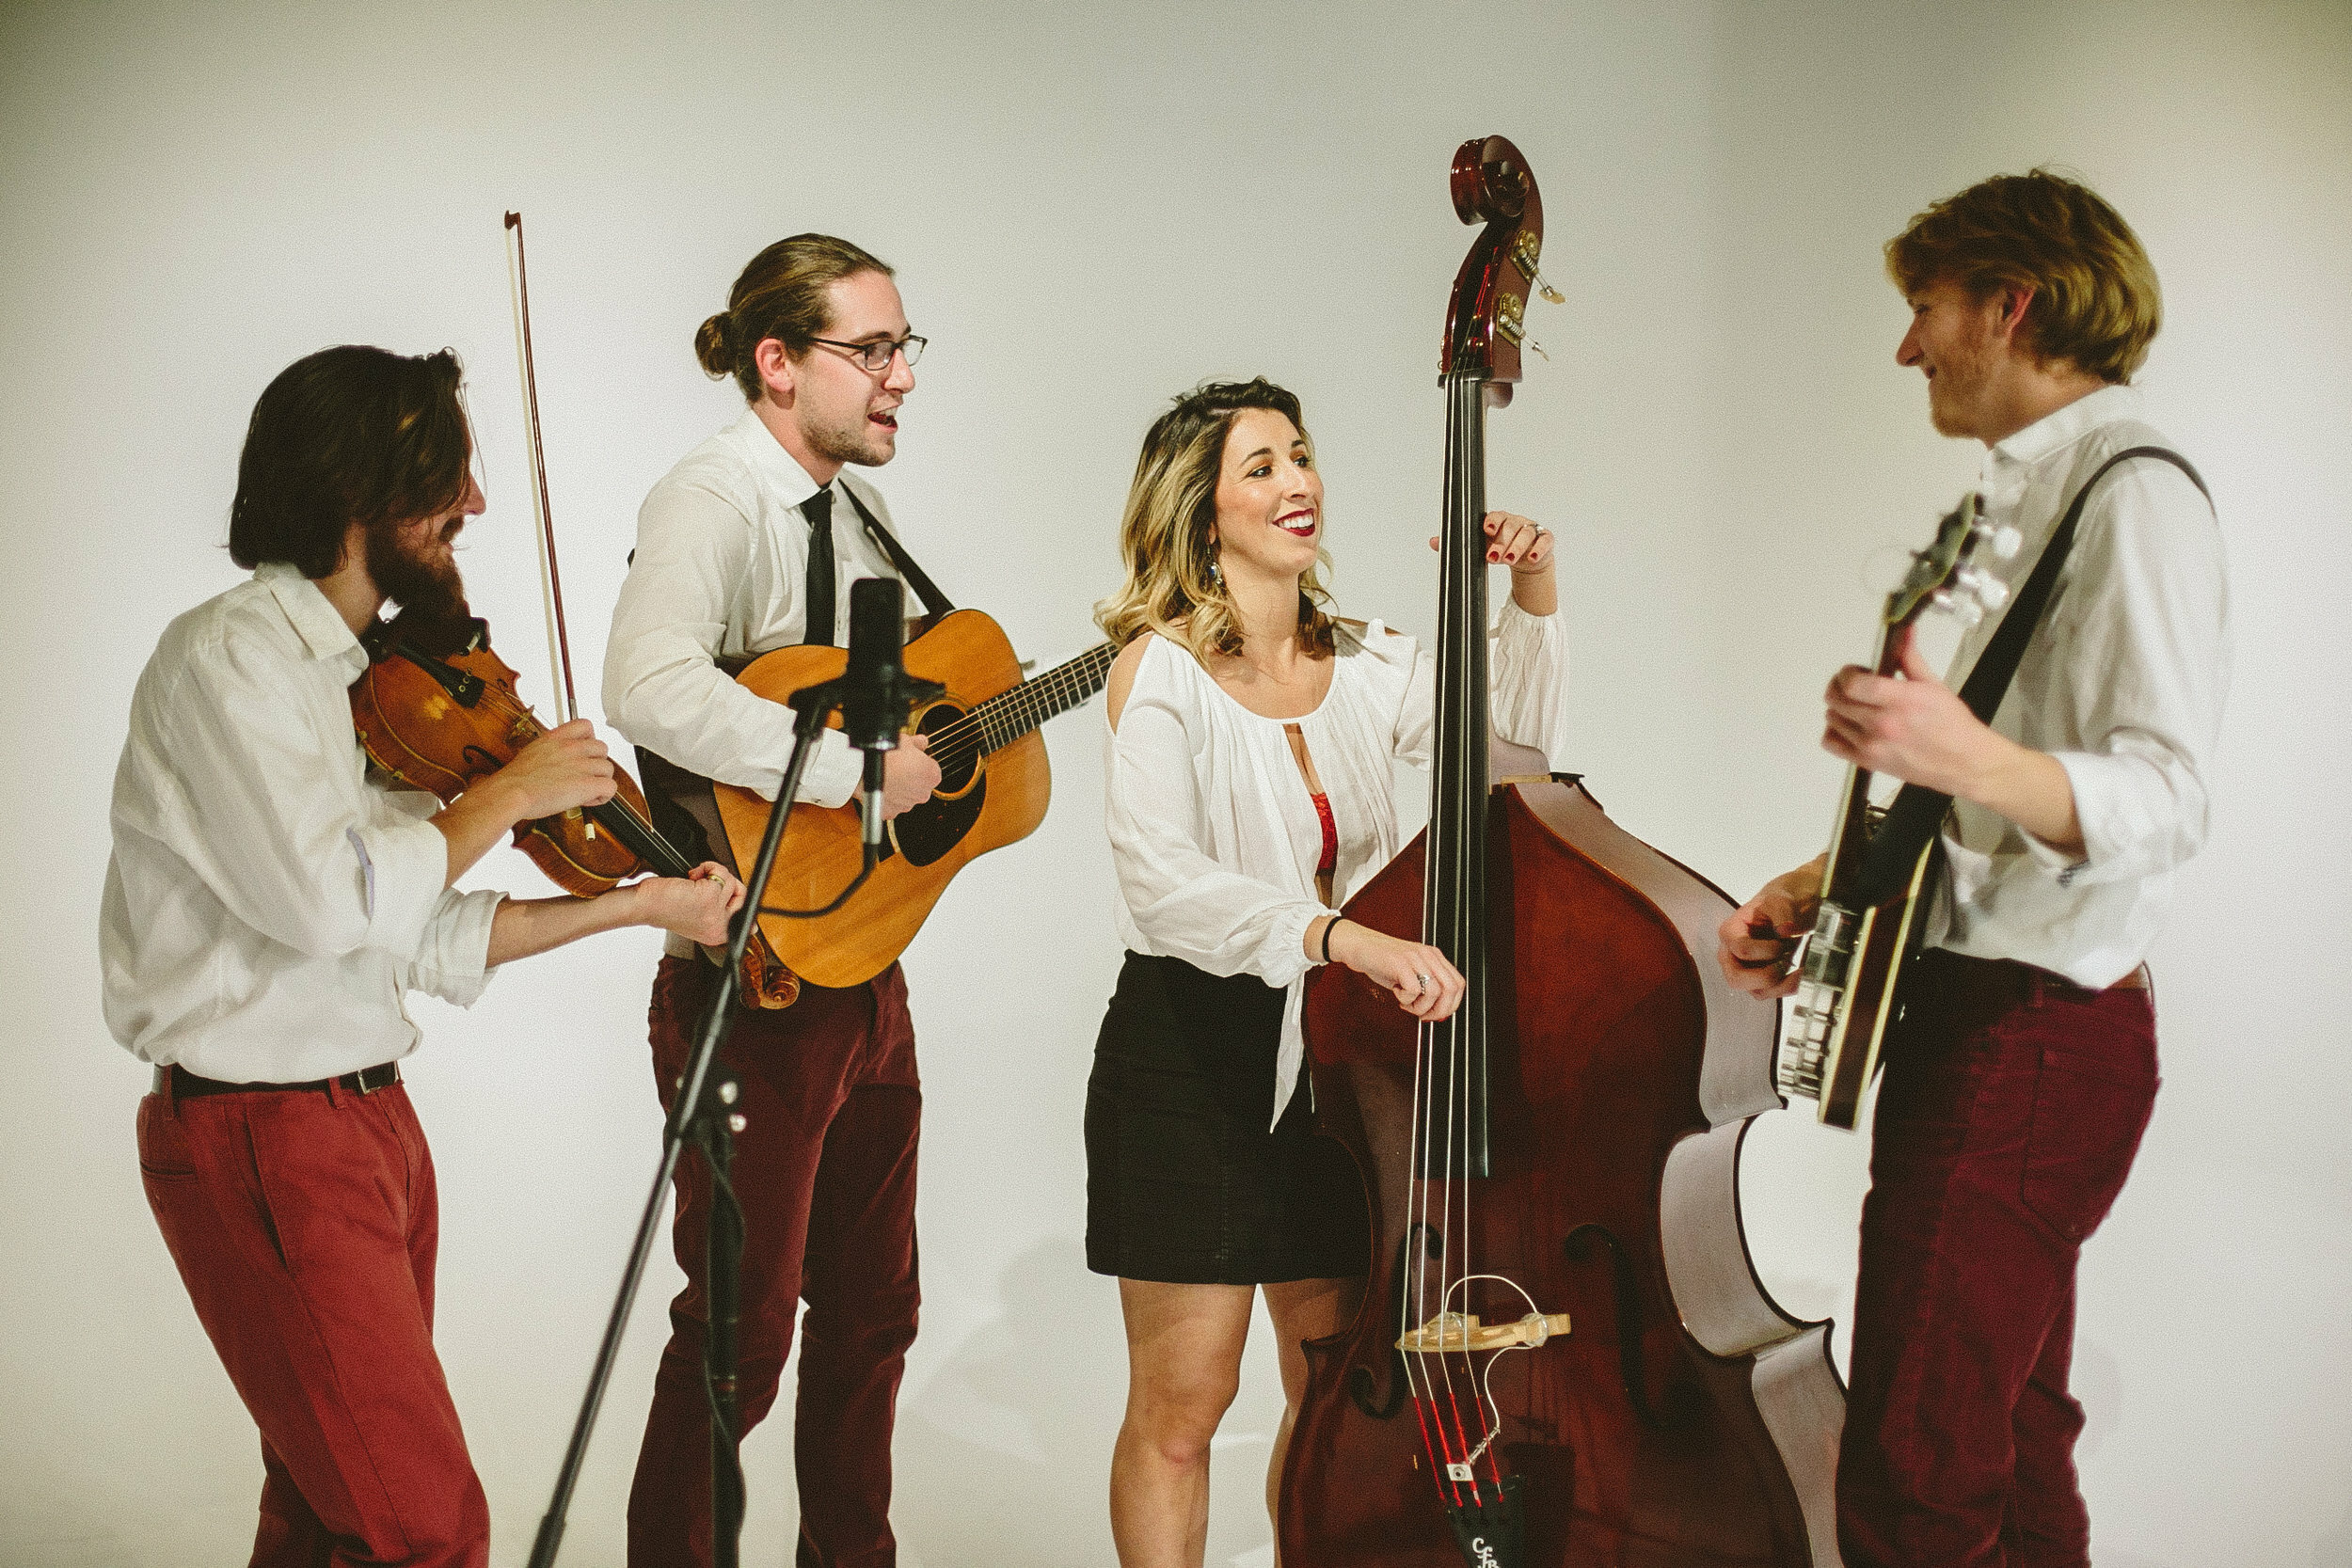 The bluegrass band Damn Tall Buildings will perform on Shelter Island as part of the Sylvester Manor music series.